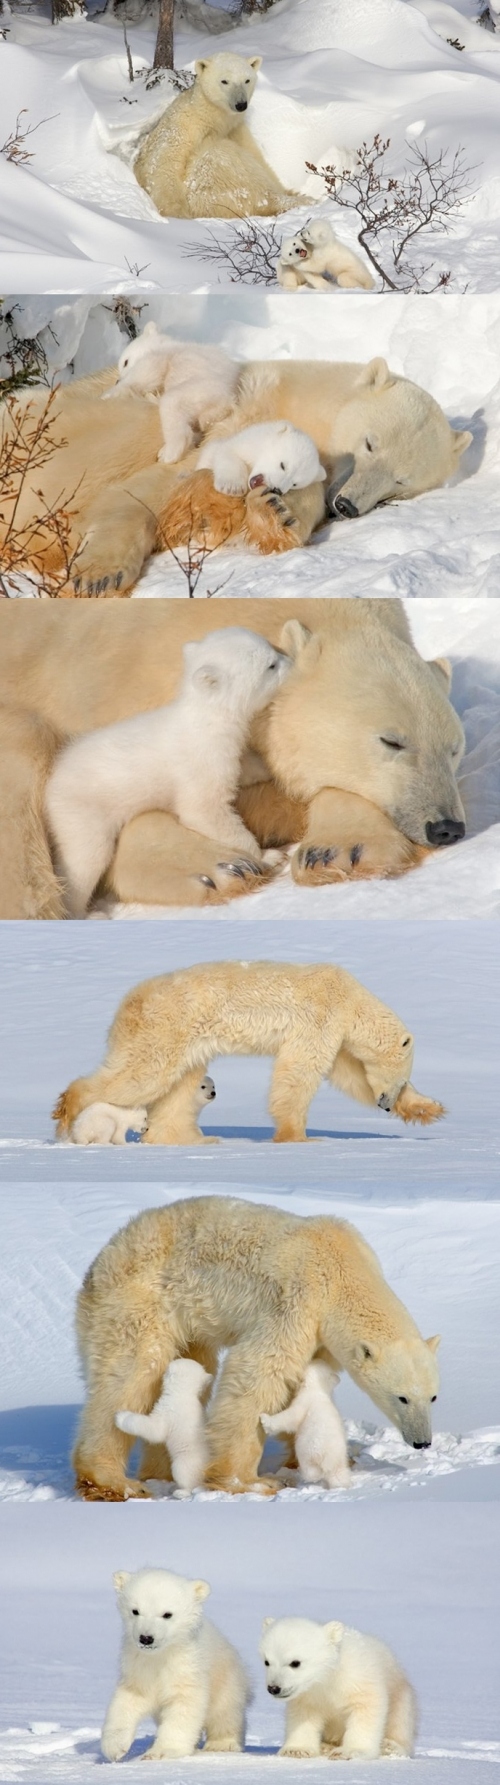 baby, bear and cold